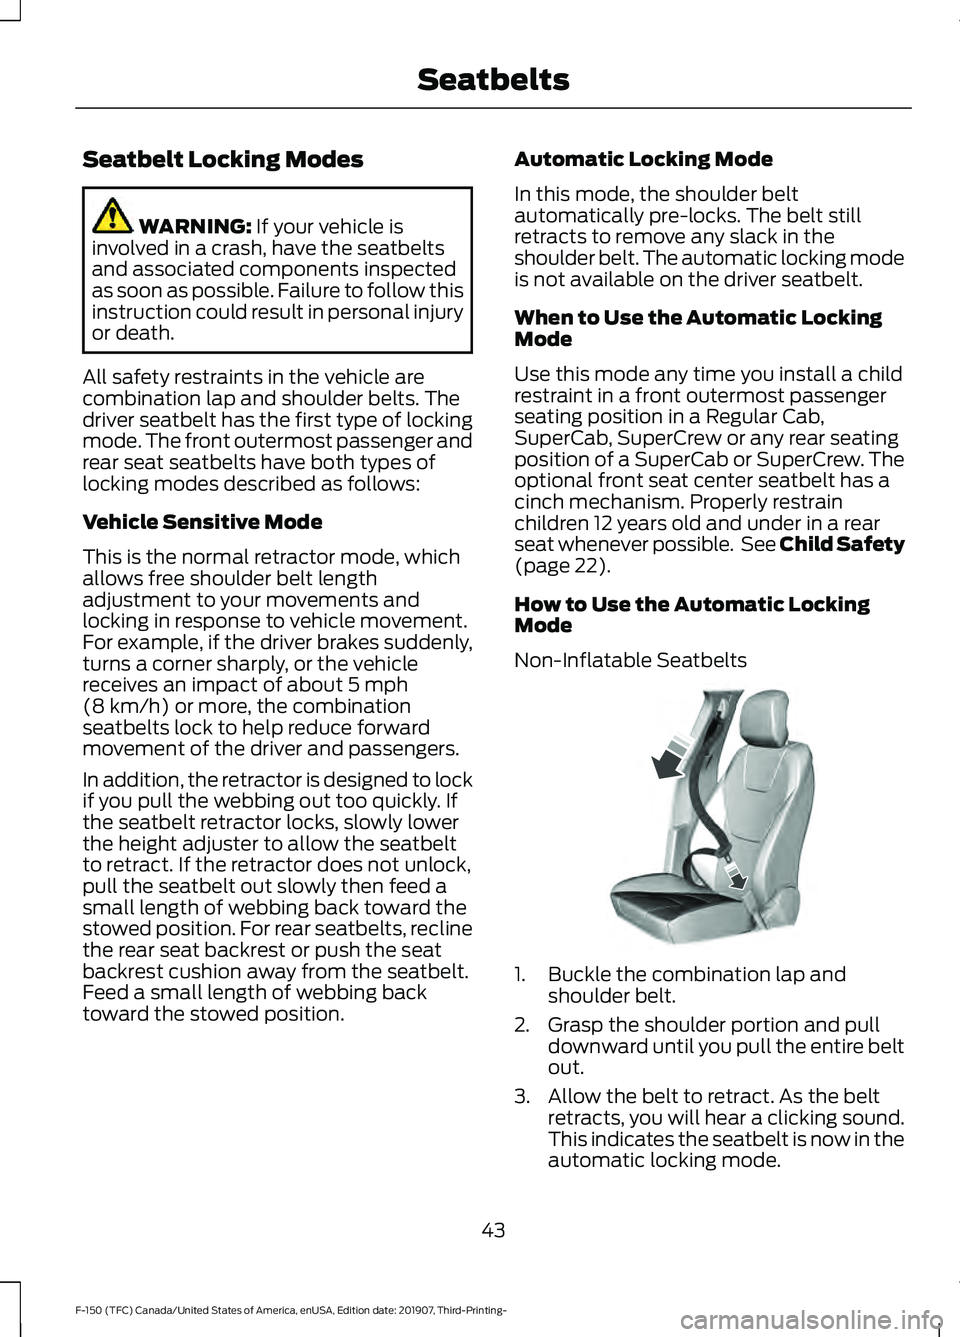 FORD F-150 2020 Service Manual Seatbelt Locking Modes
WARNING: If your vehicle is
involved in a crash, have the seatbelts
and associated components inspected
as soon as possible. Failure to follow this
instruction could result in p